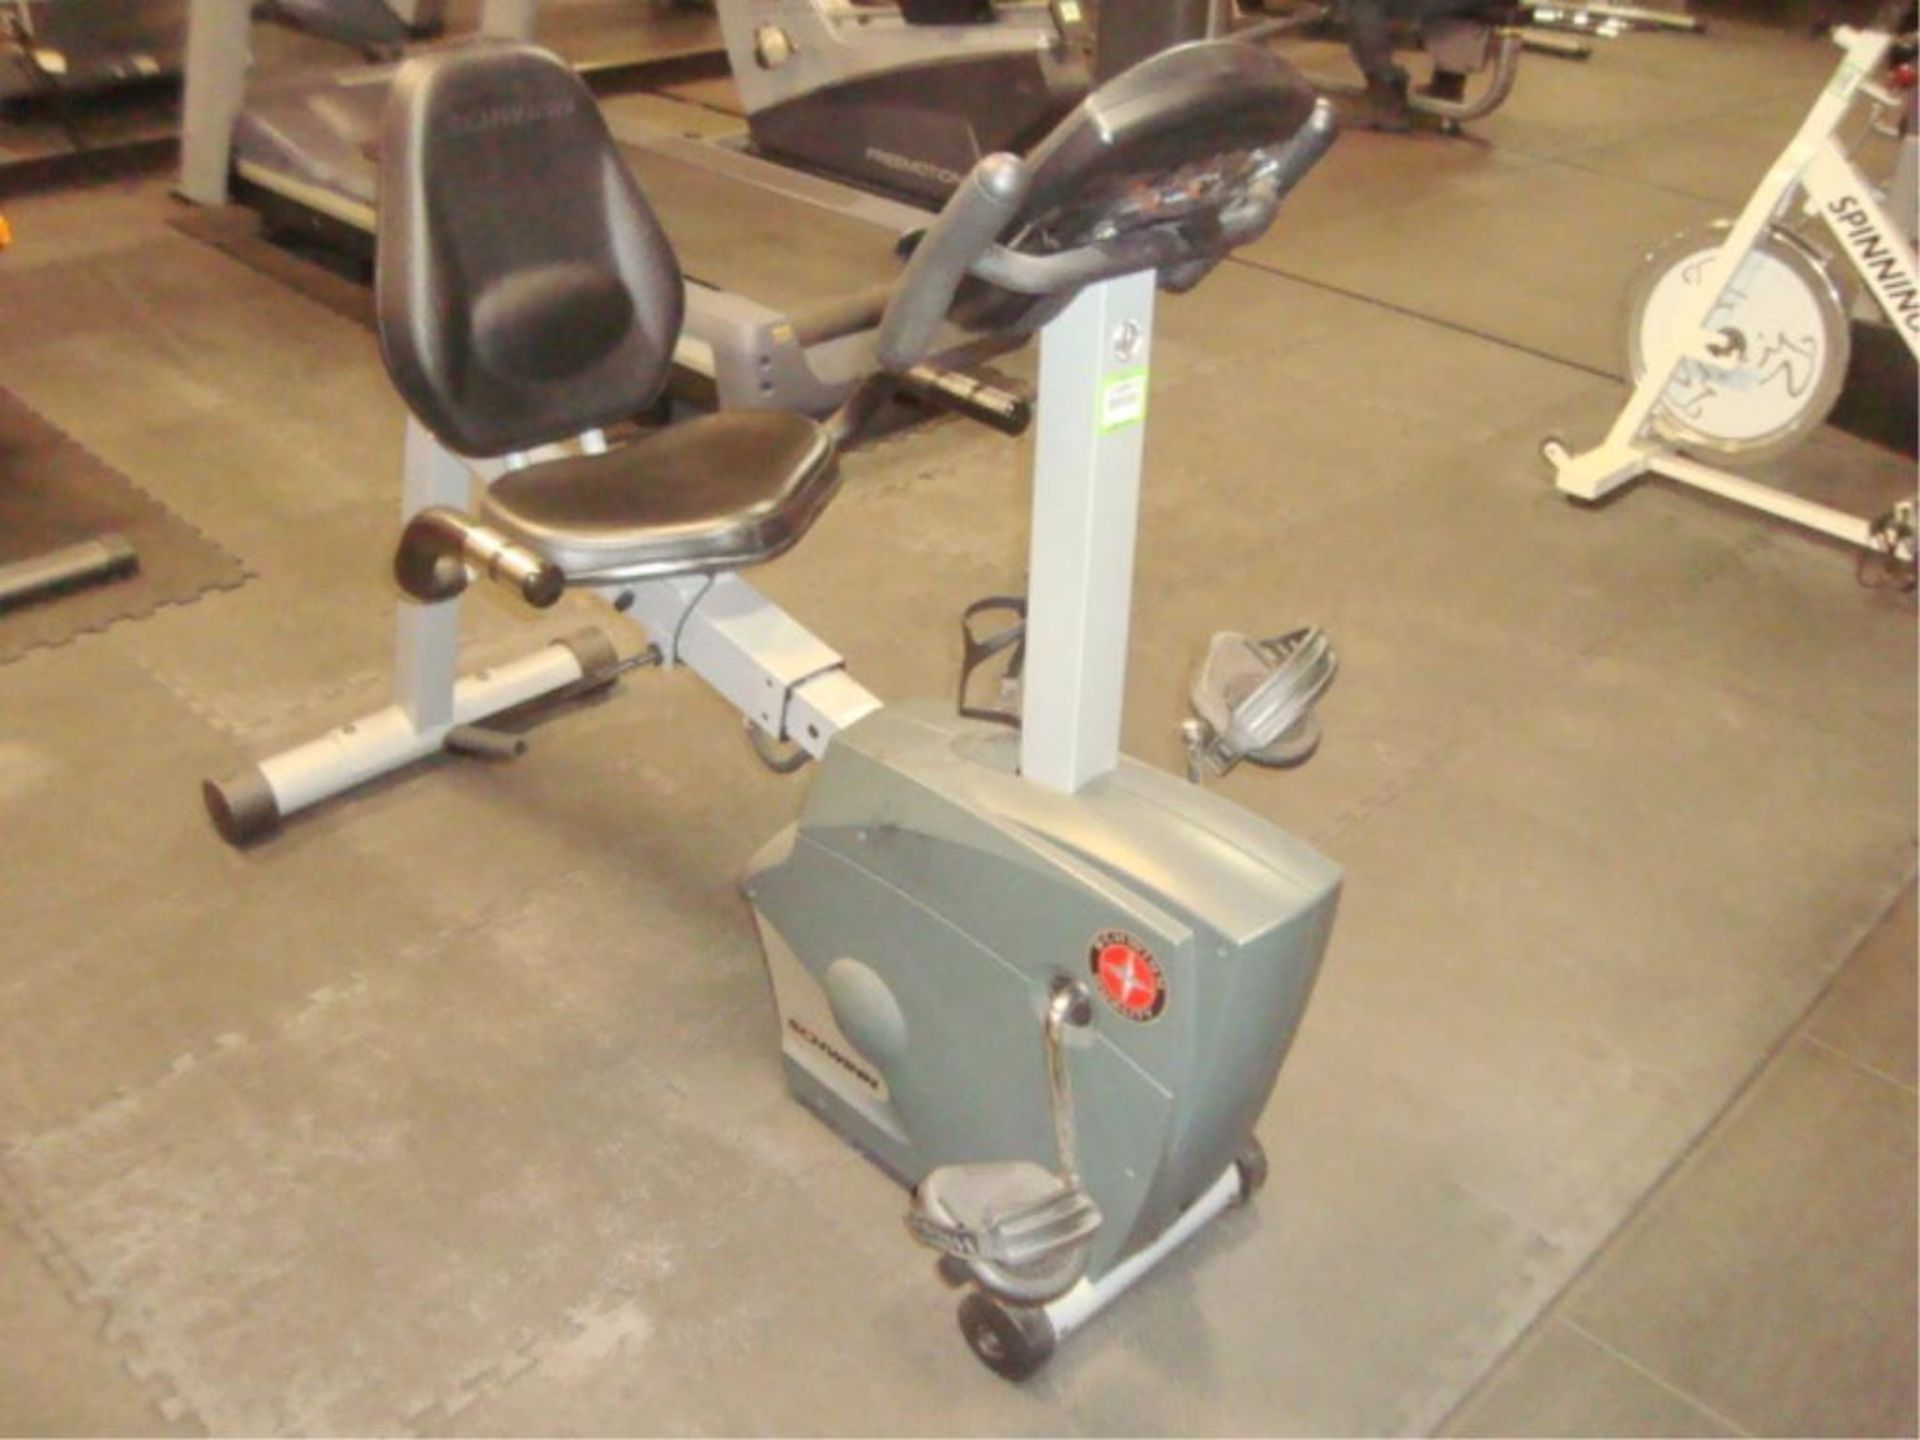 Exerciser Cycling Machine - Image 7 of 7